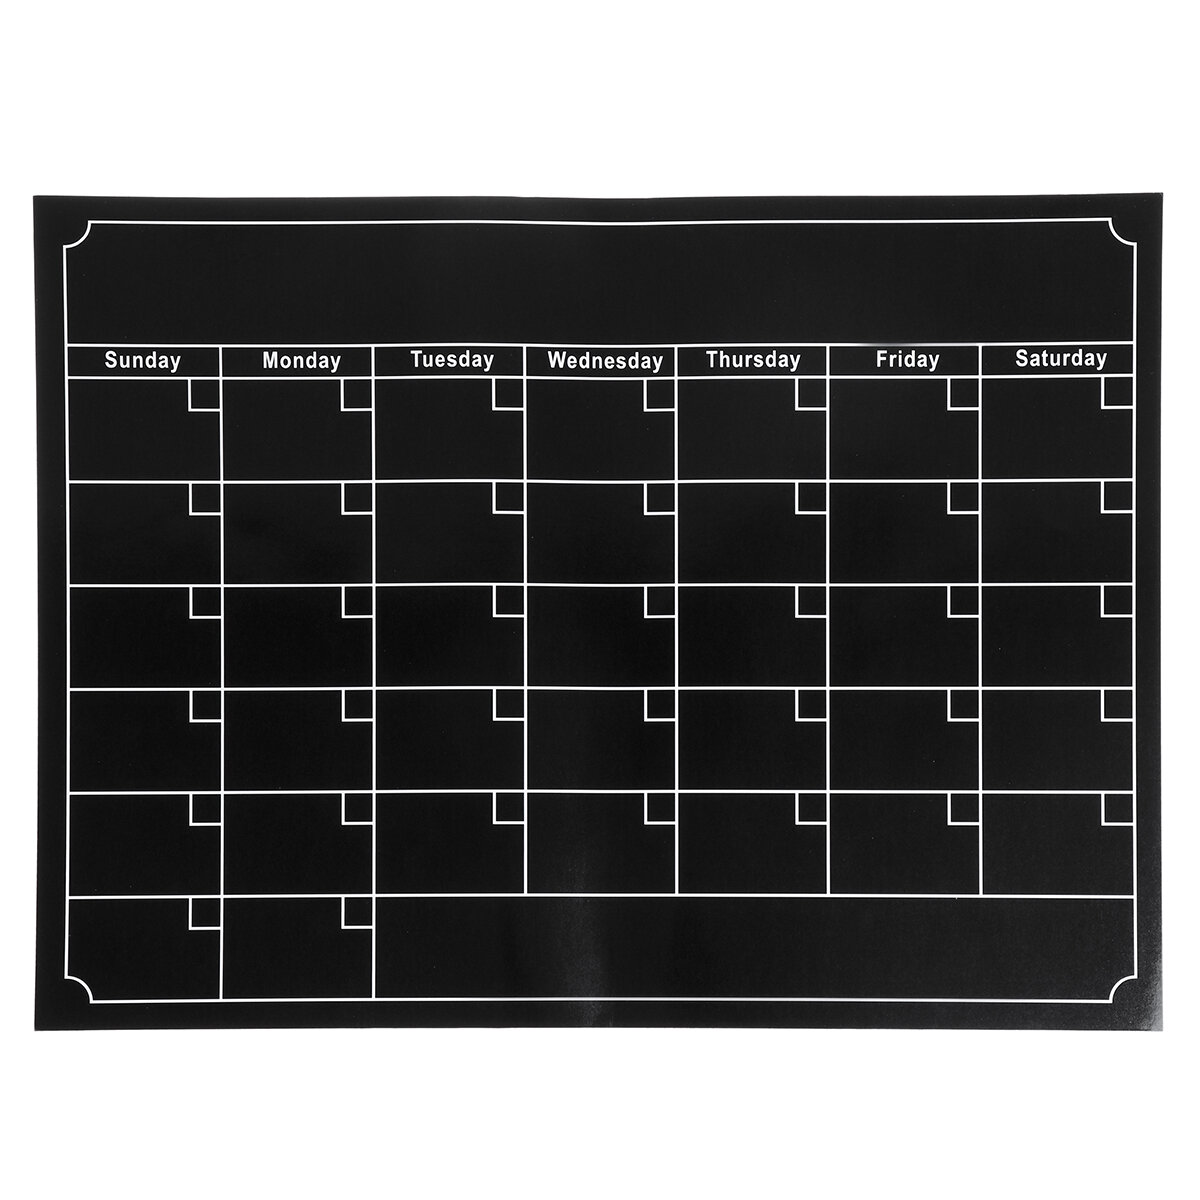 whiteboard-magnetic-monthly-weekly-planner-calendar-schedule-for